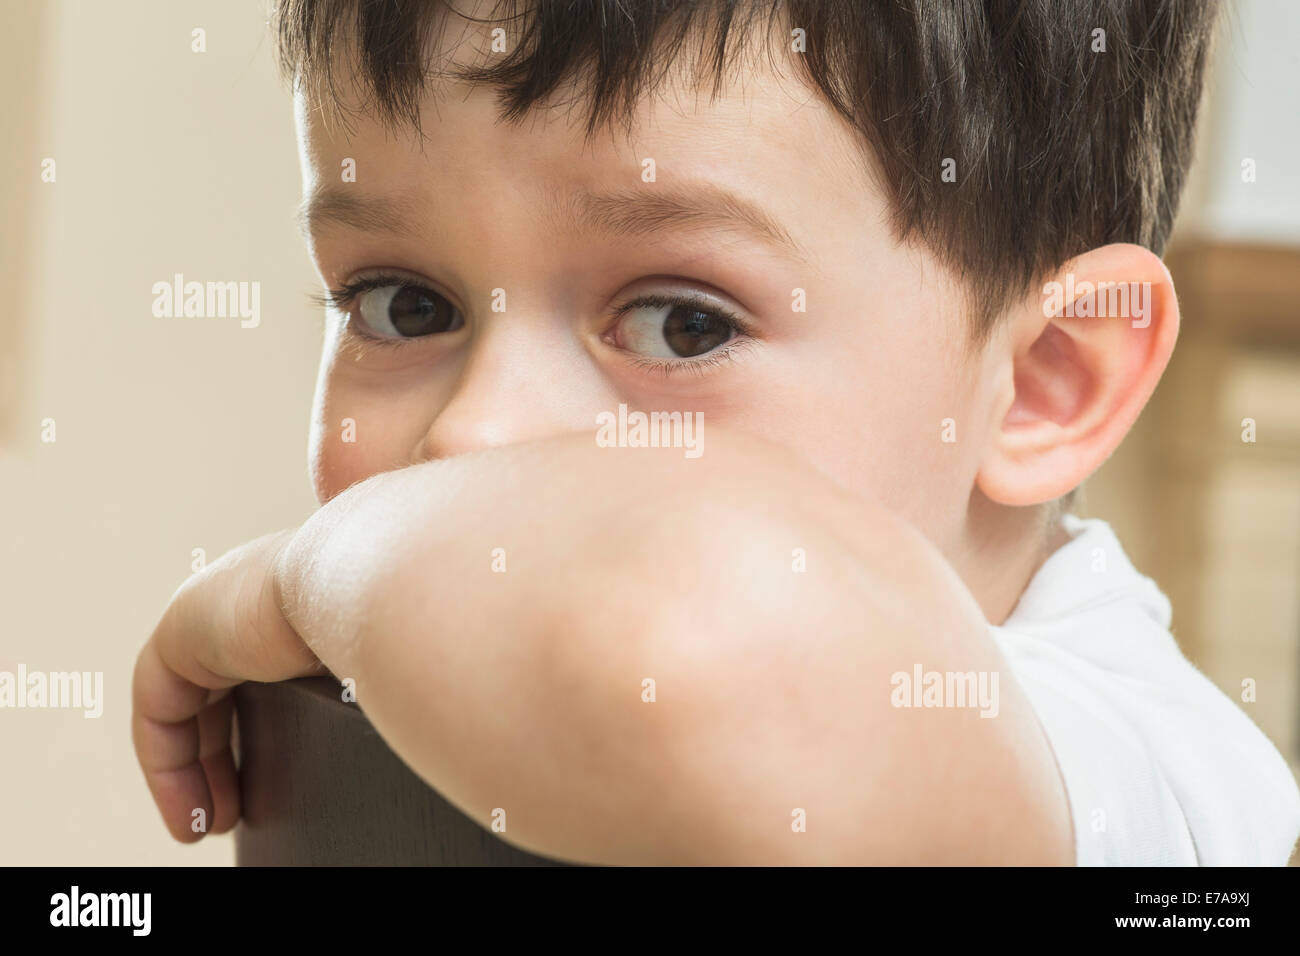 Close-up portrait of cute boy at home Stock Photo